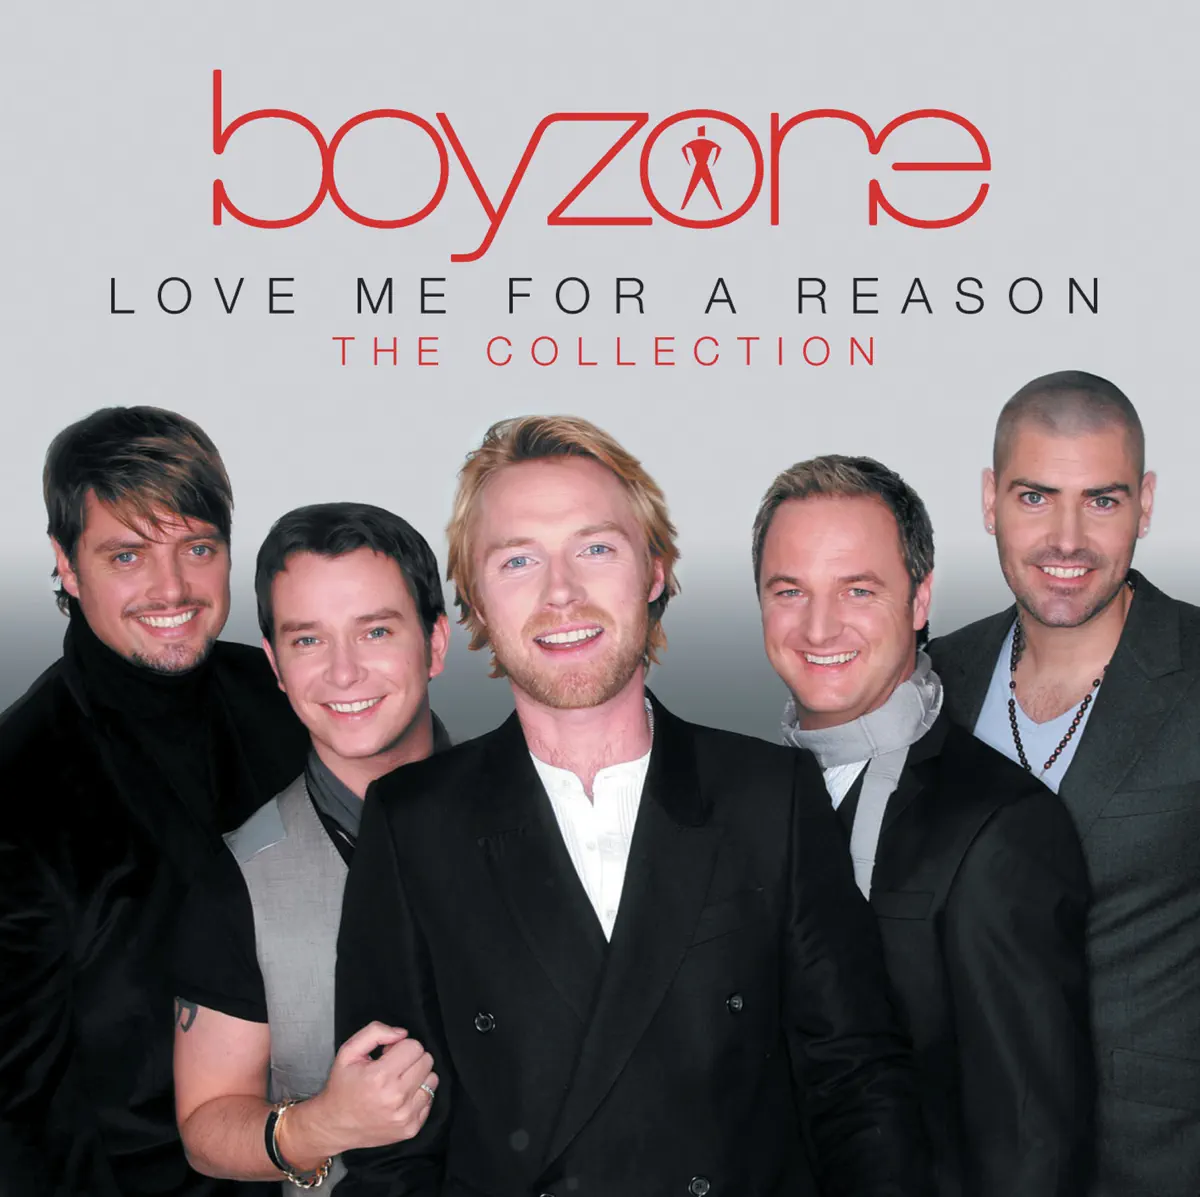 Boyzone - Love Me For a Reason: The Collection (2014) [iTunes Plus AAC M4A]-新房子